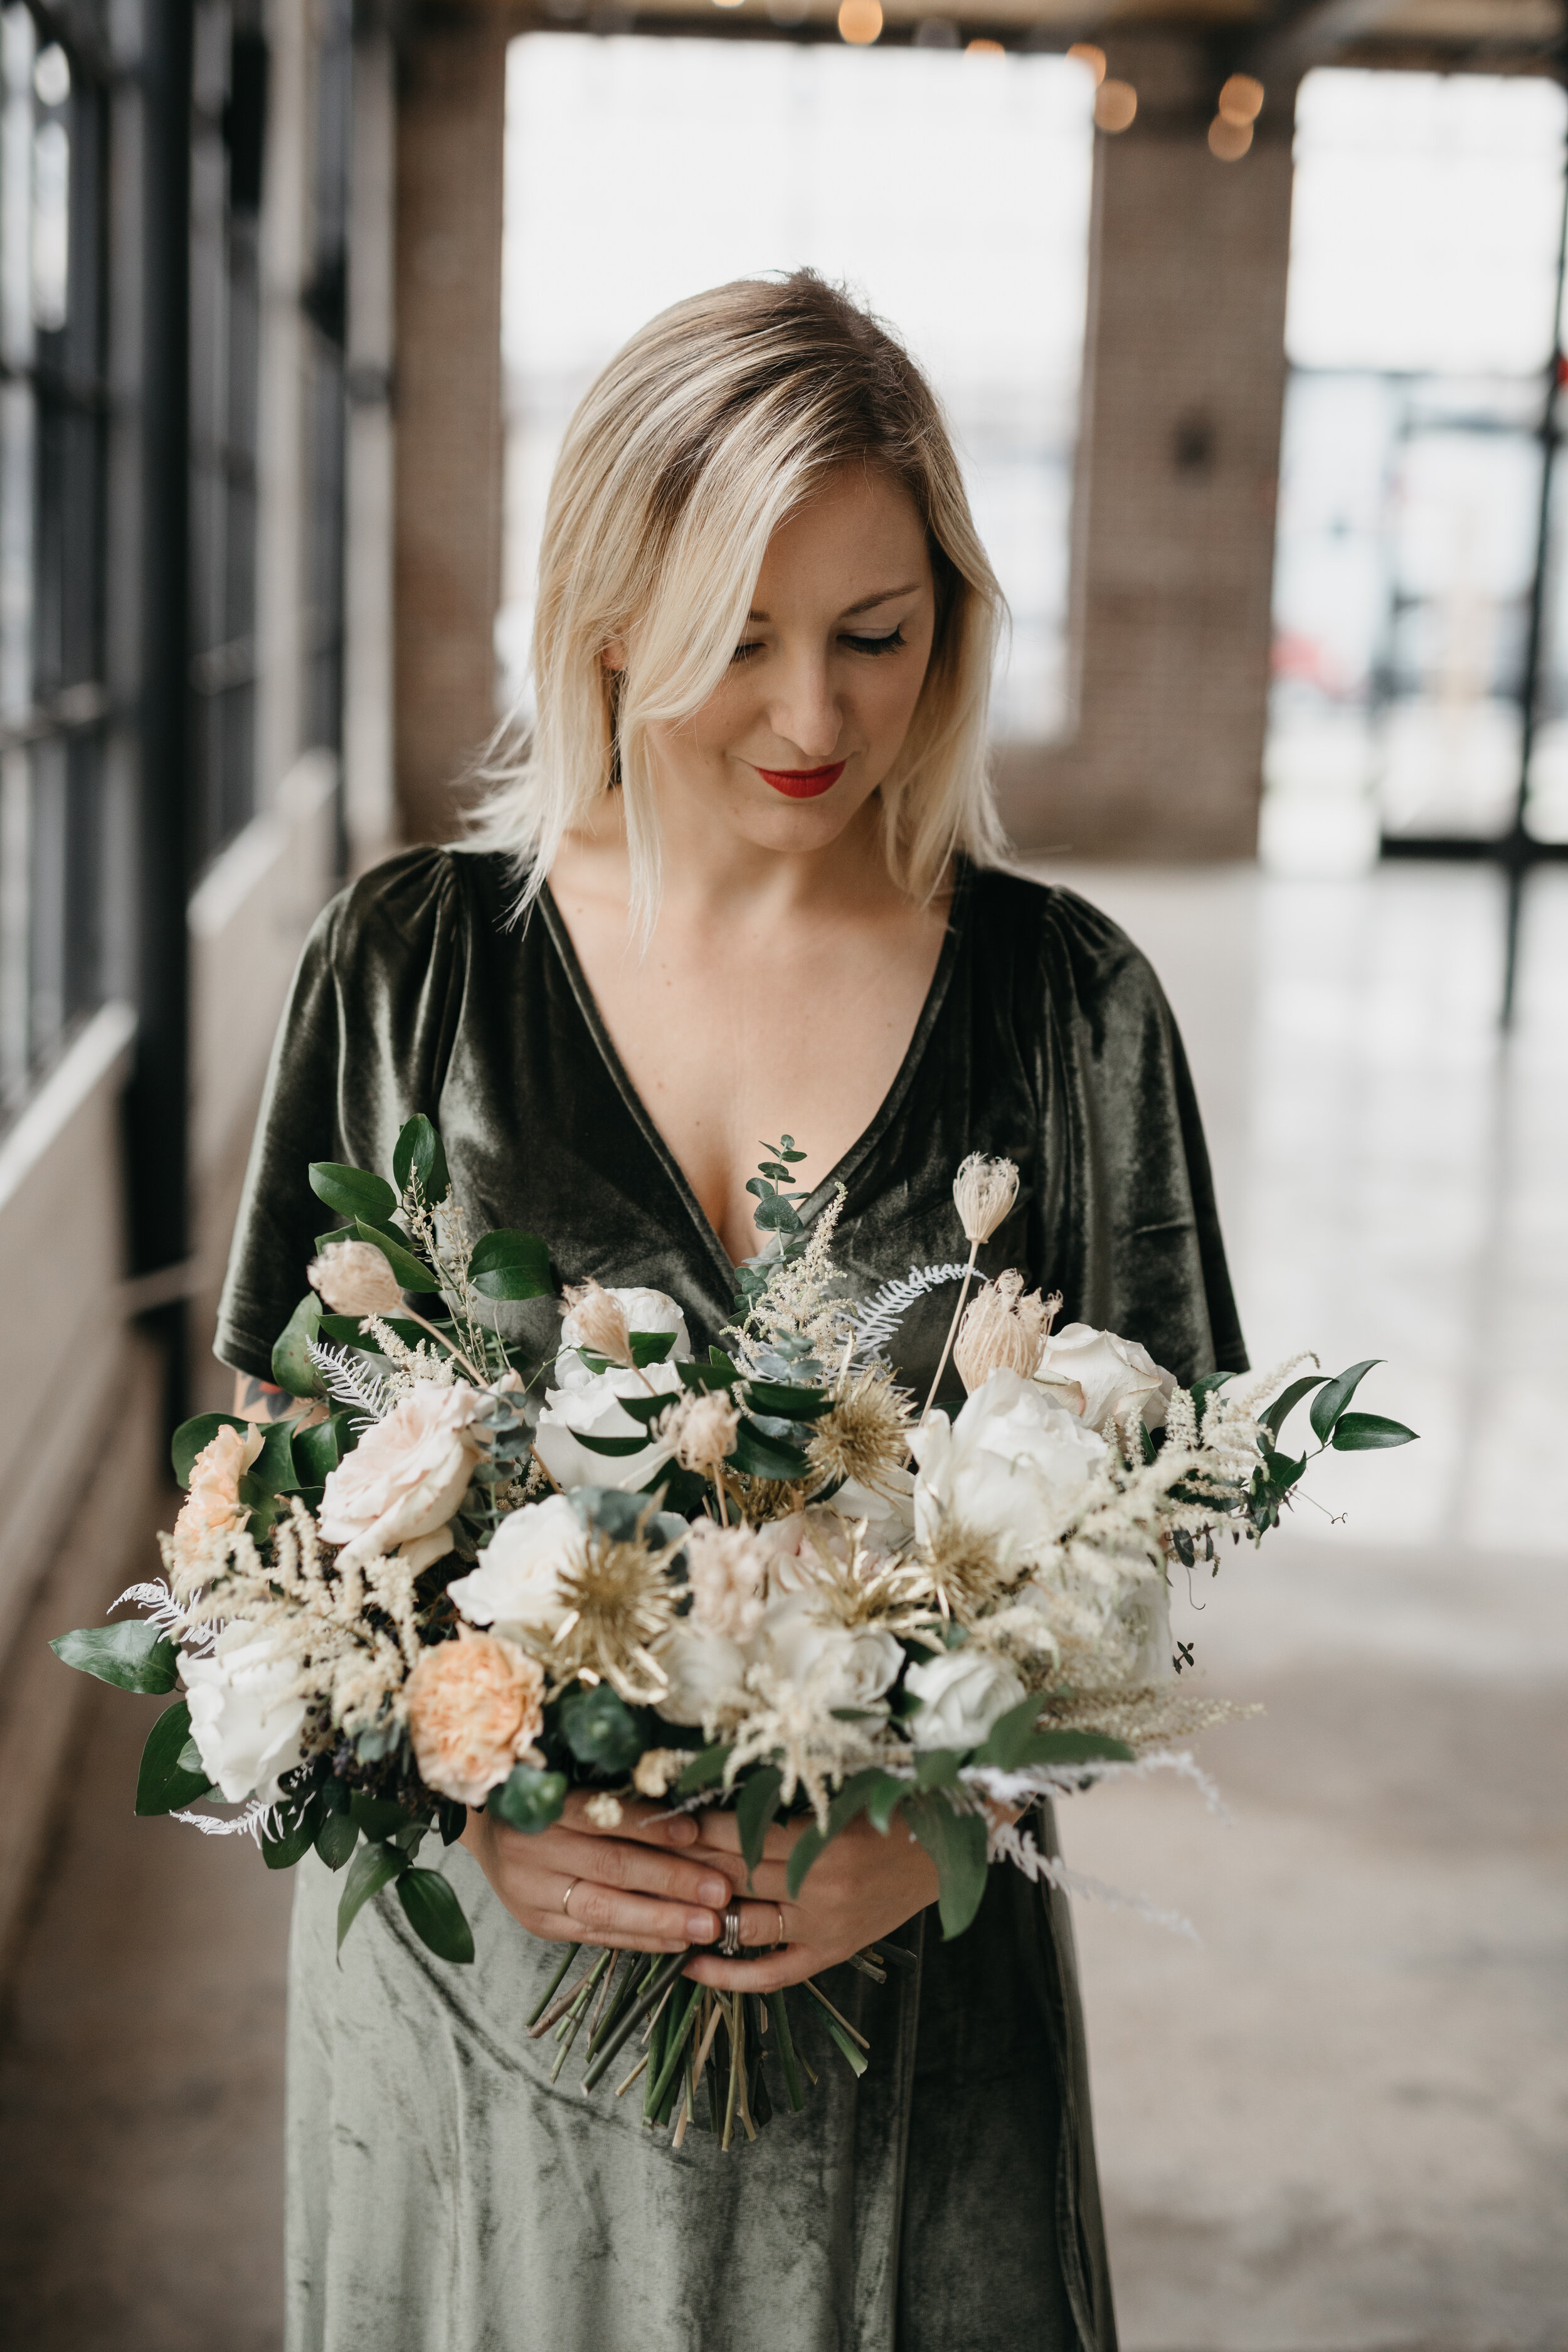 Wintery bouquet filled with fresh and dried florals, white roses, quicksand roses, astilbe, baby eucalyptus, lush greenery, and touches of gold. Nashville wedding florist Rosemary & Finch at OZARI.